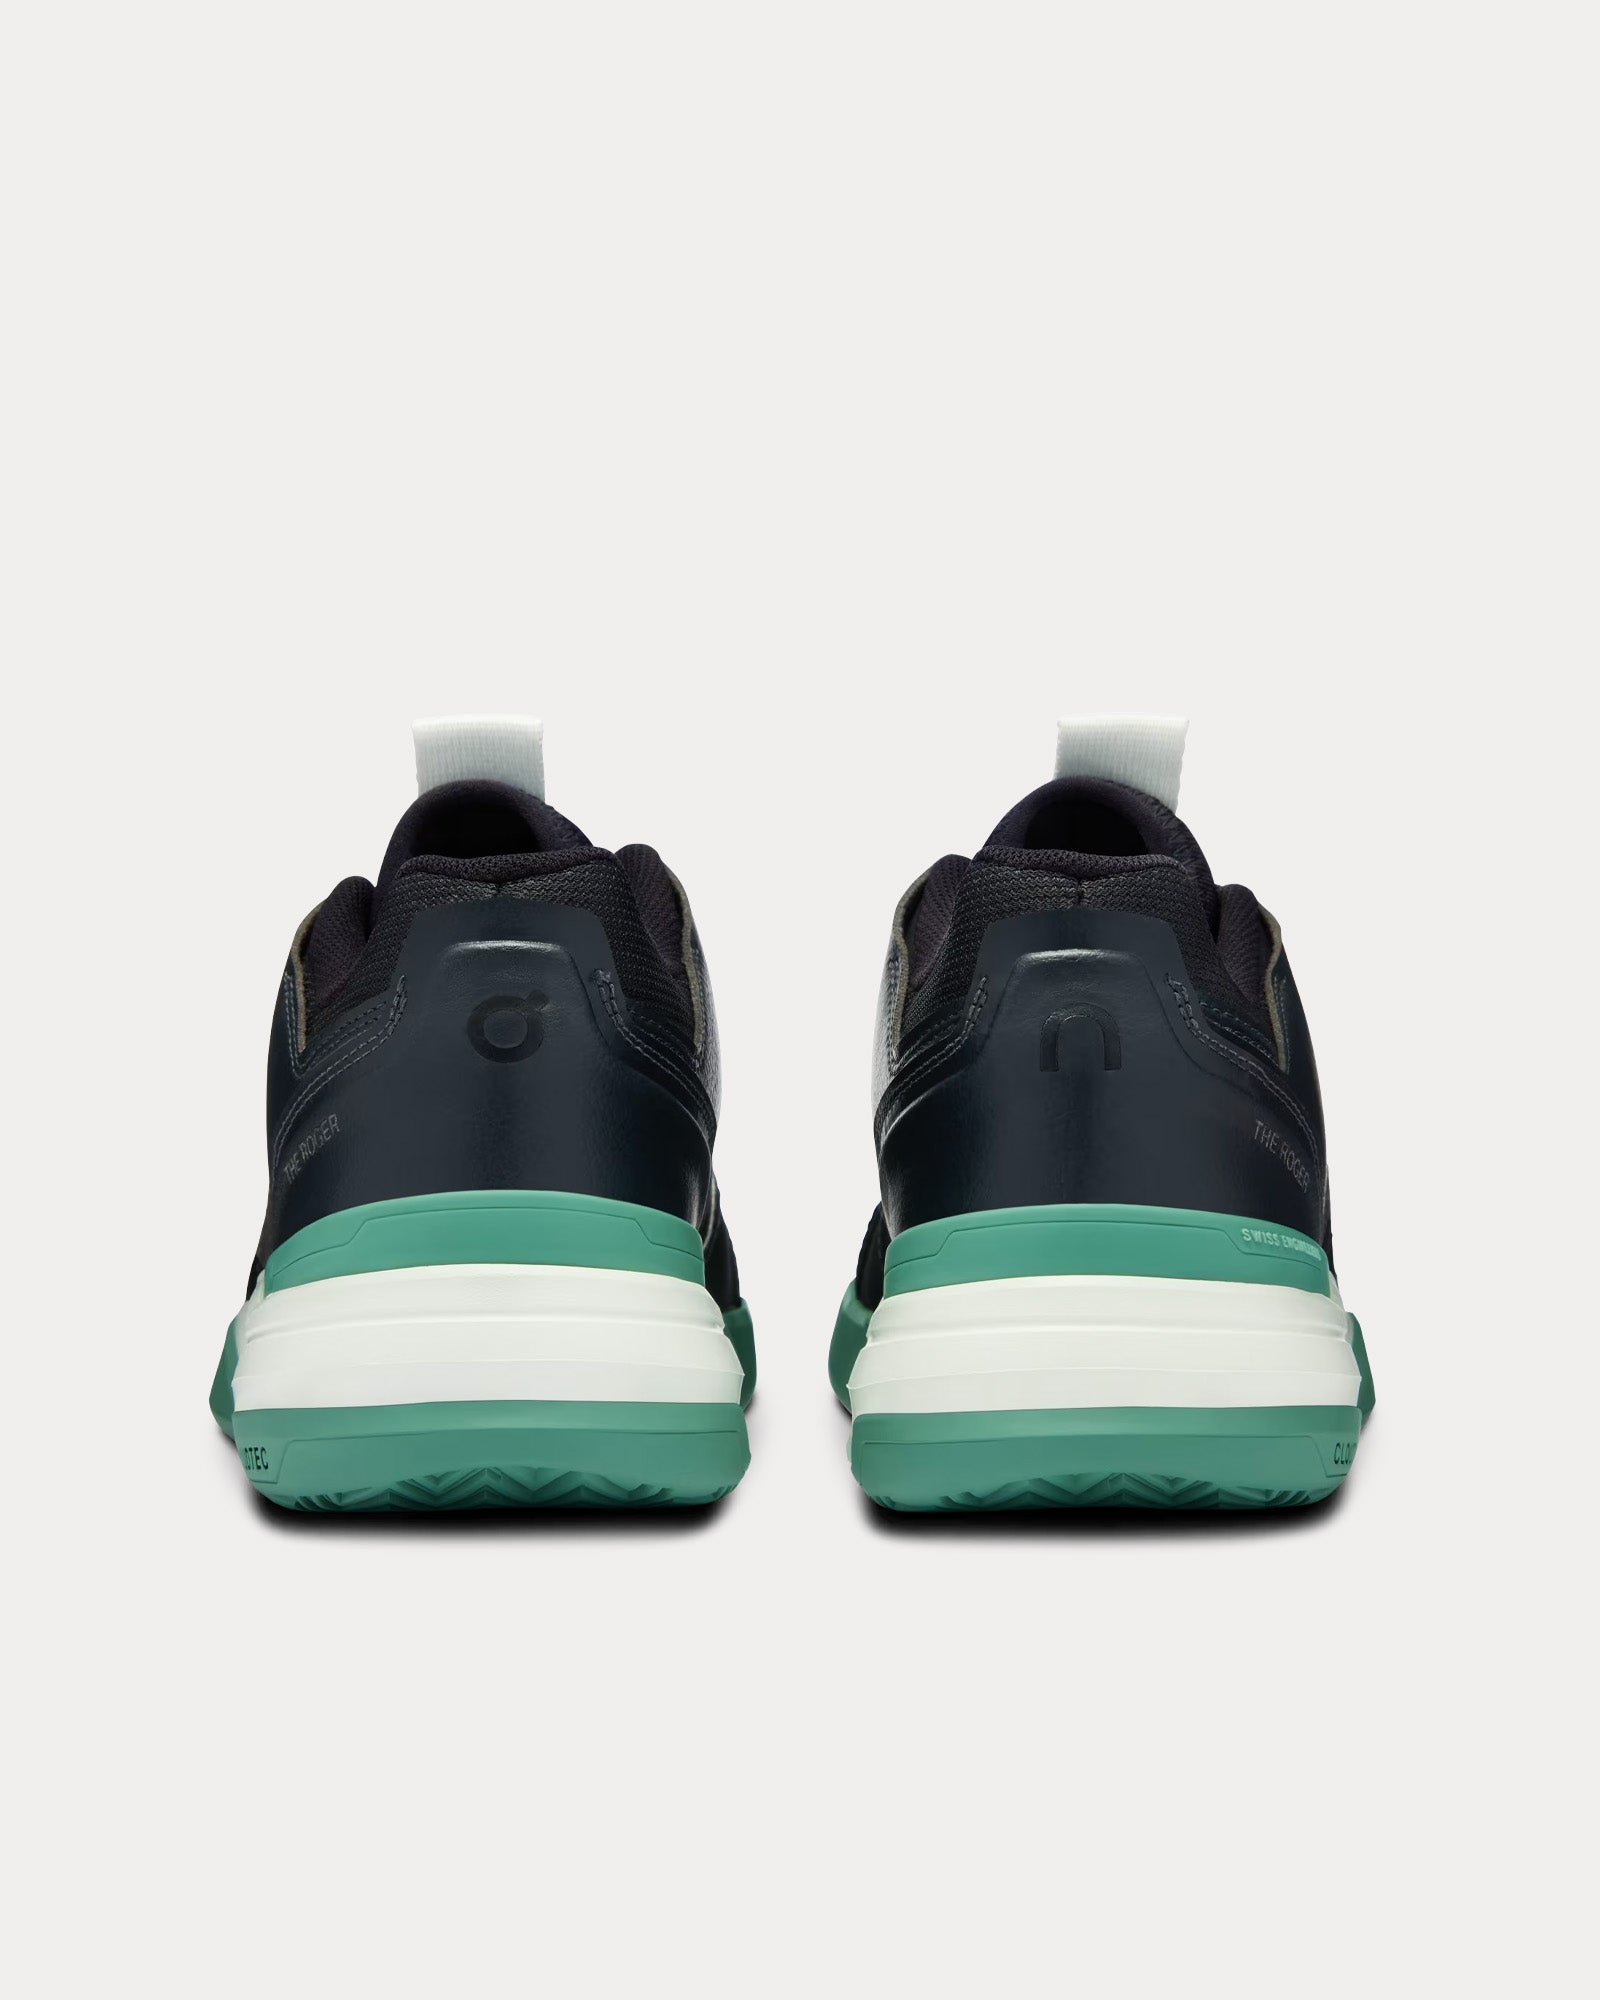 On Running - The Roger Clubhouse Pro Black / Green Low Top Sneakers